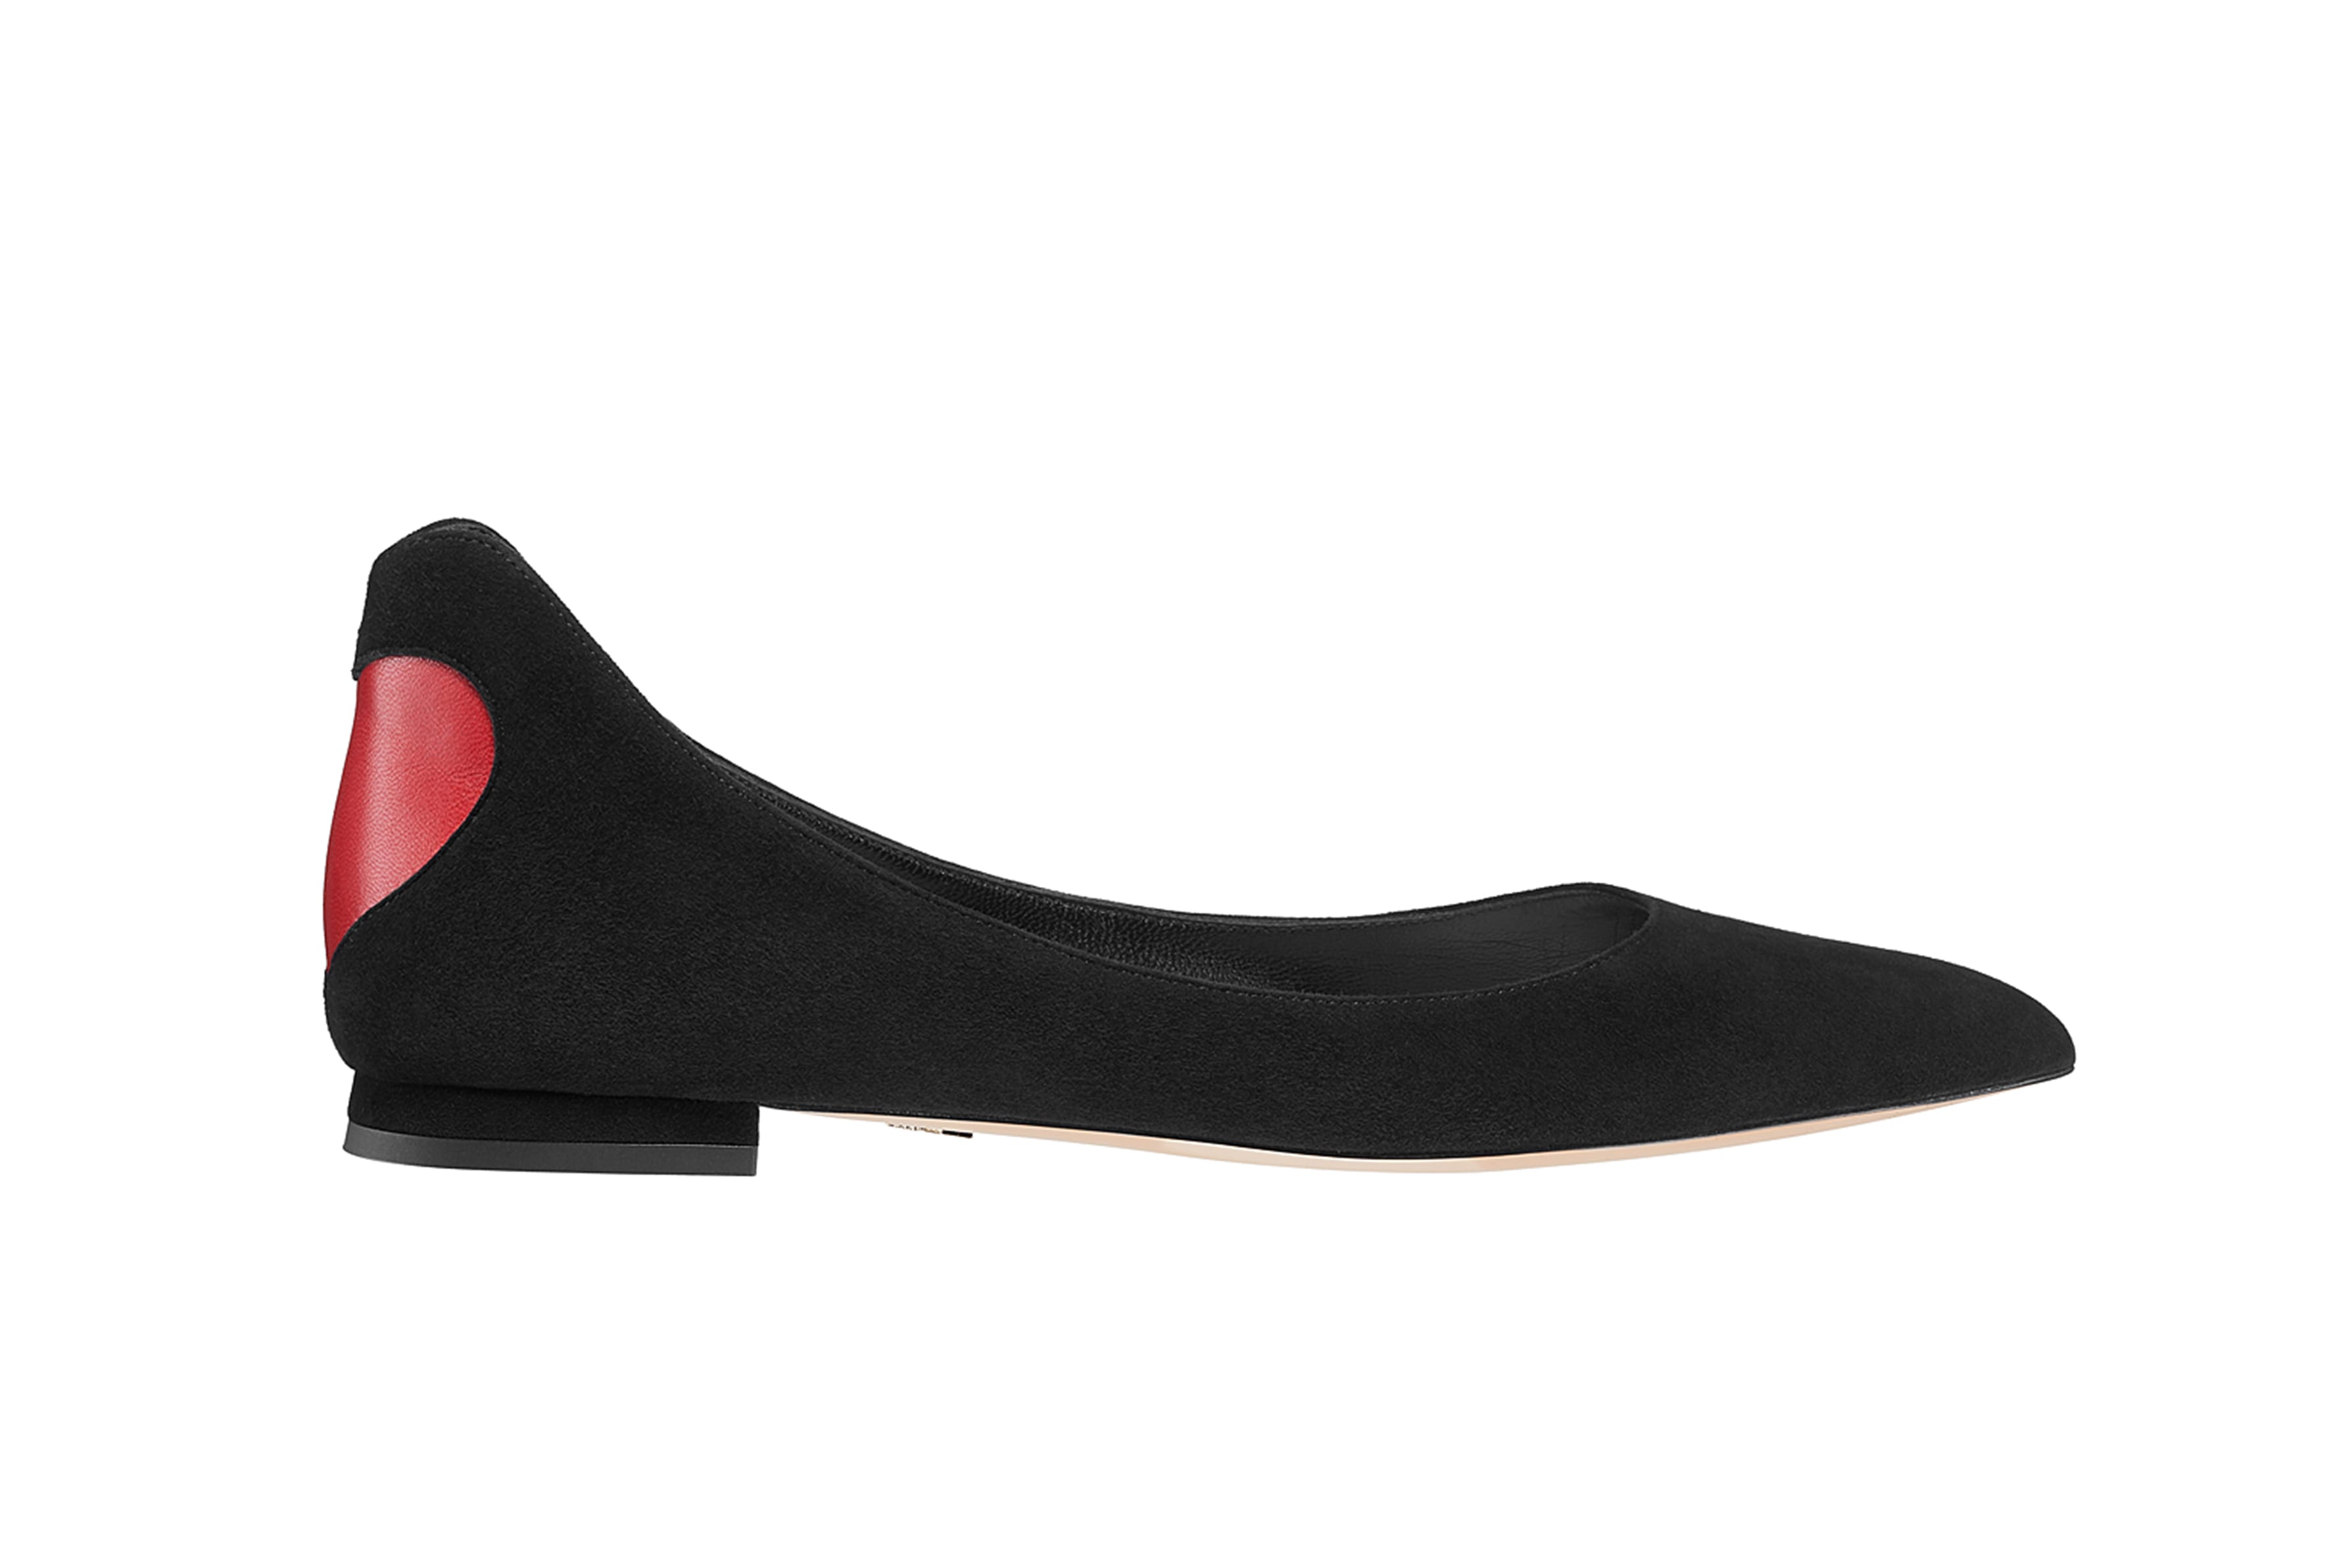 The Dior Amour Pumps With Embroidered 